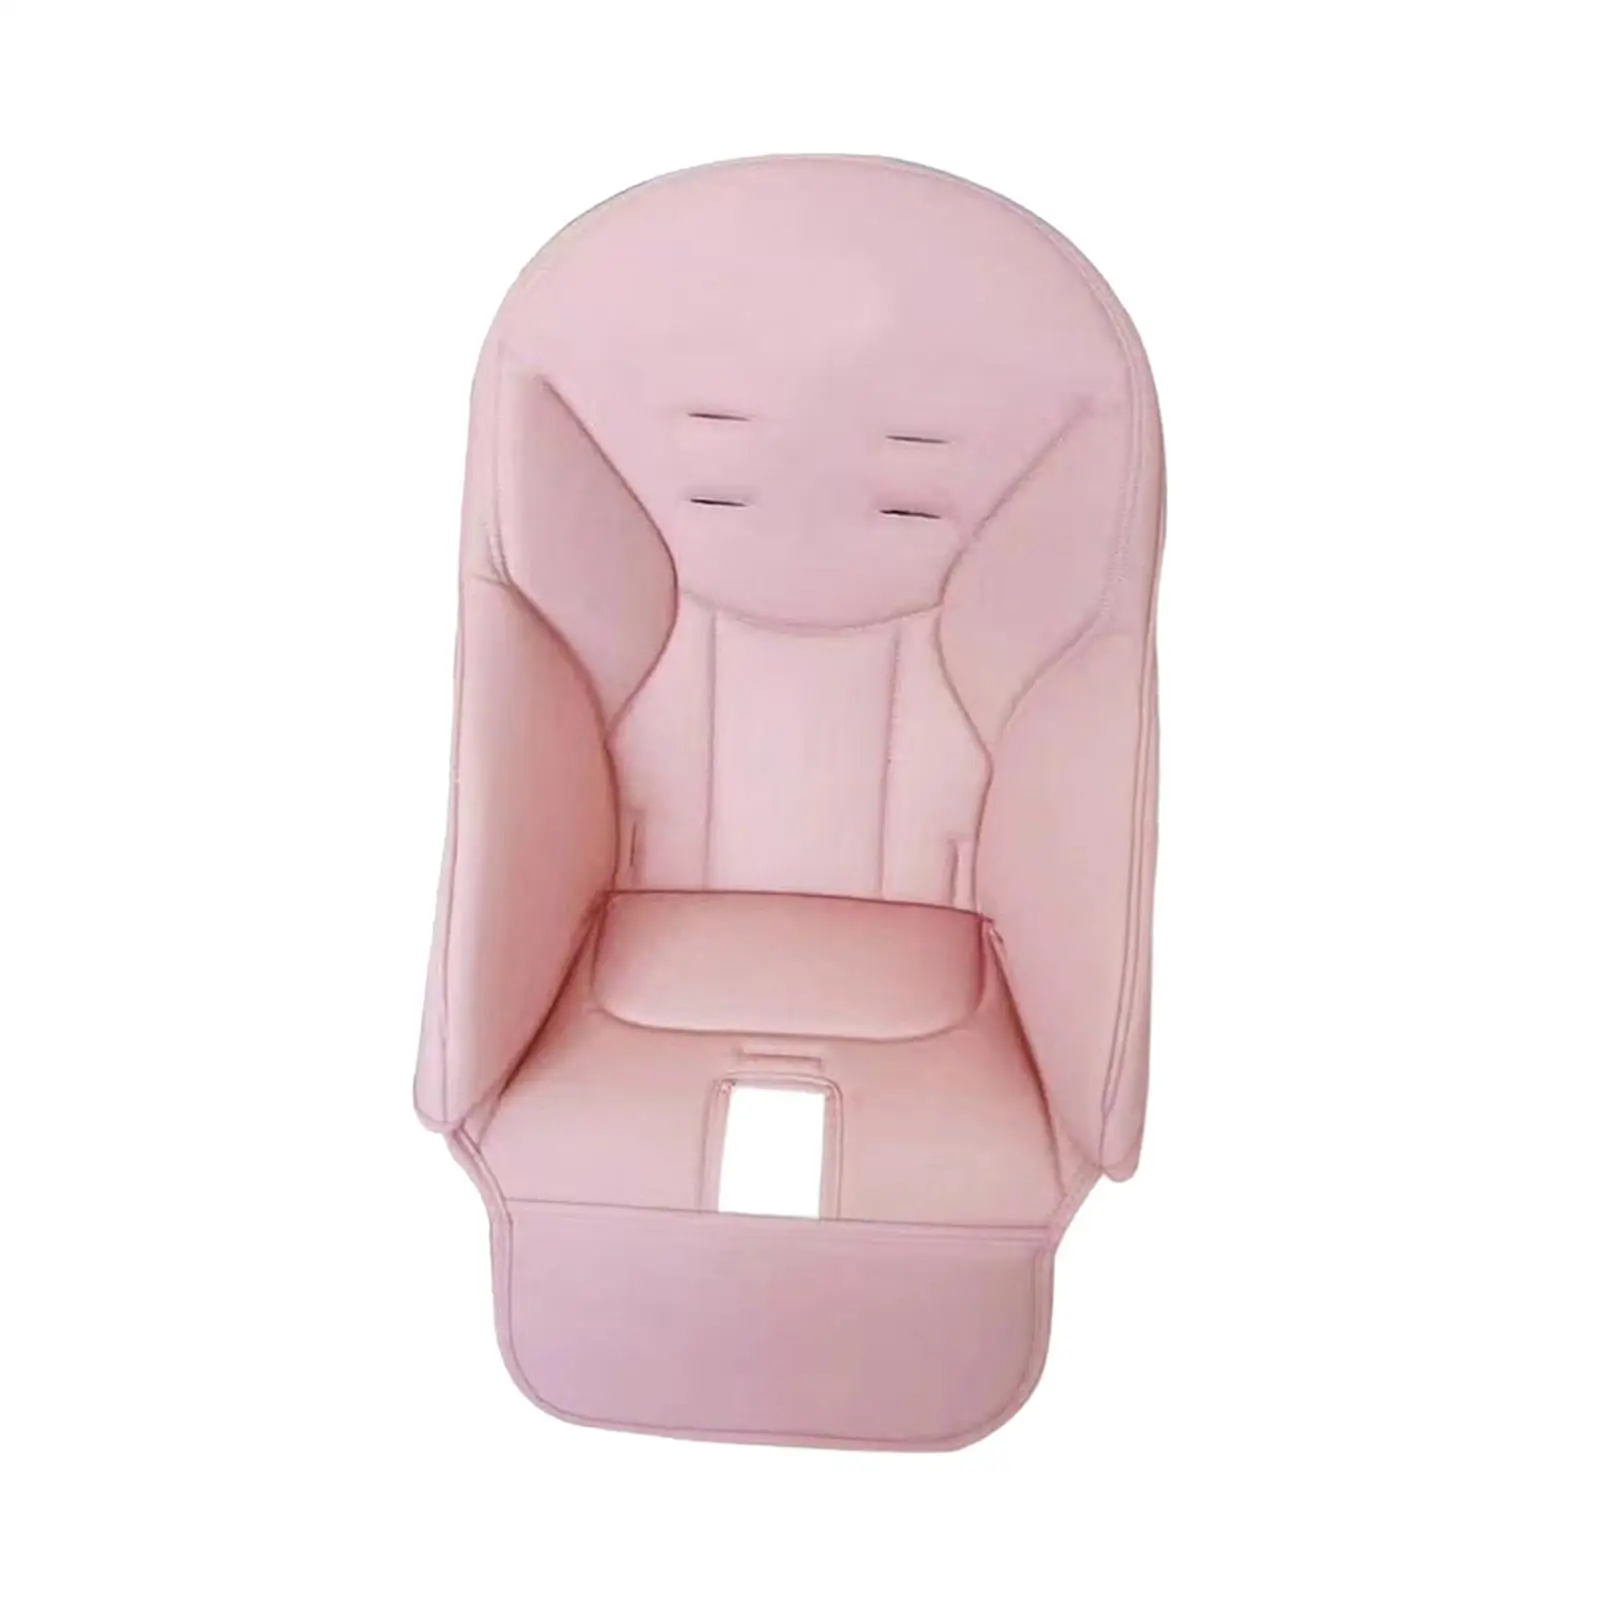 Baby Dining Chair Cover Multifunctional Chair Protector for Baby Kids Girls